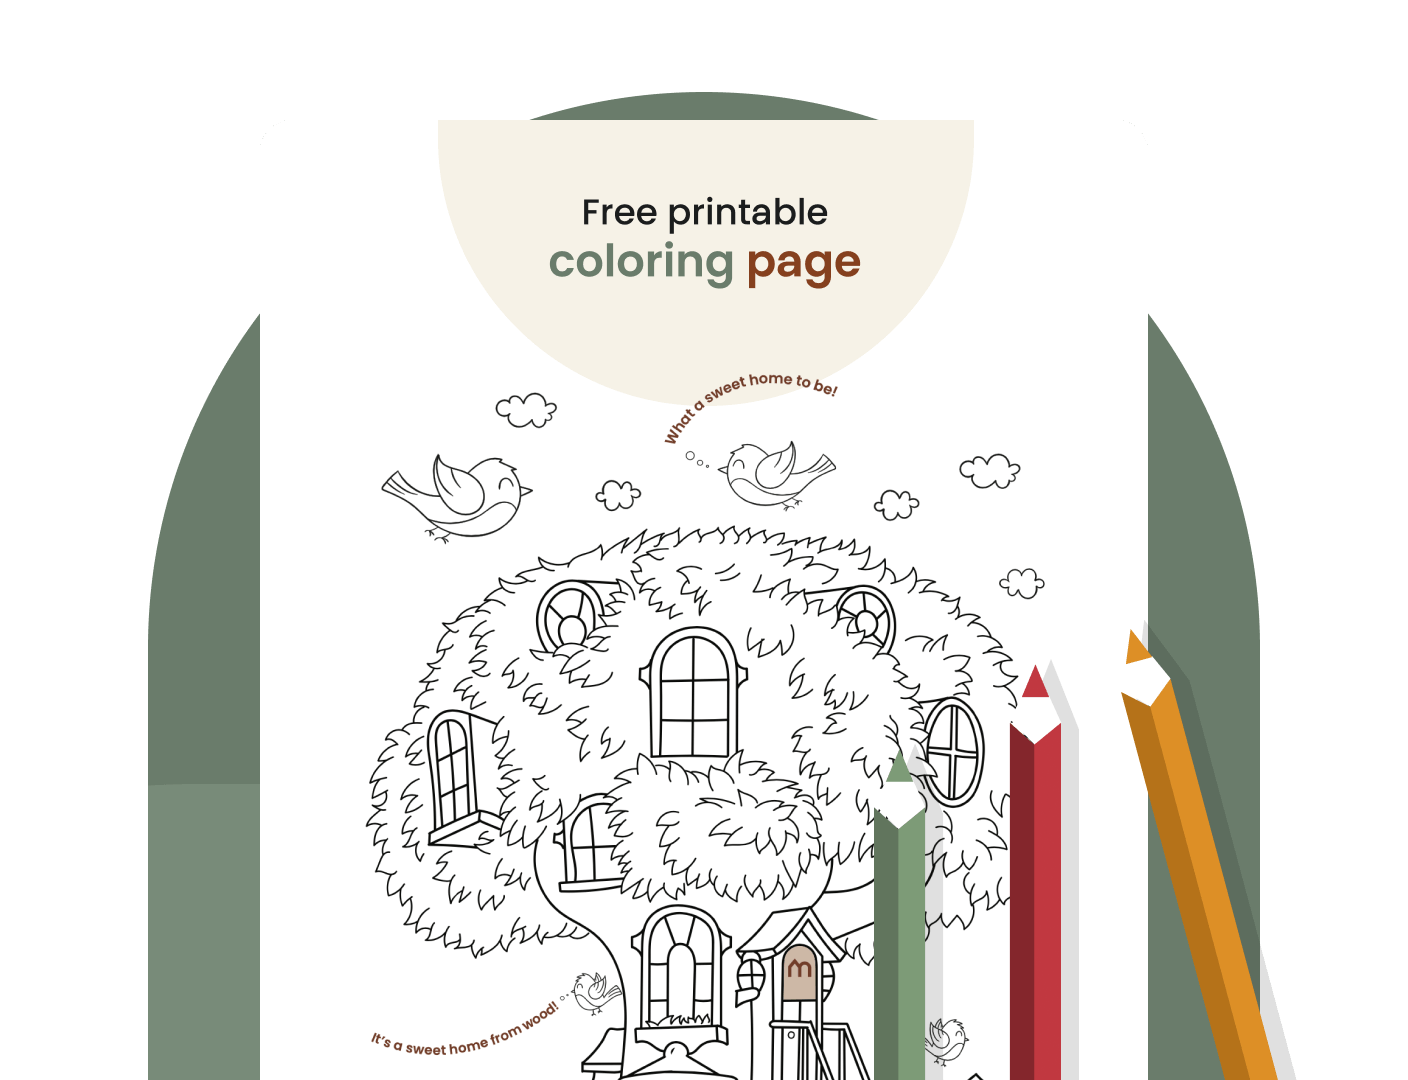 Subscribe and get free printable coloring page in your email